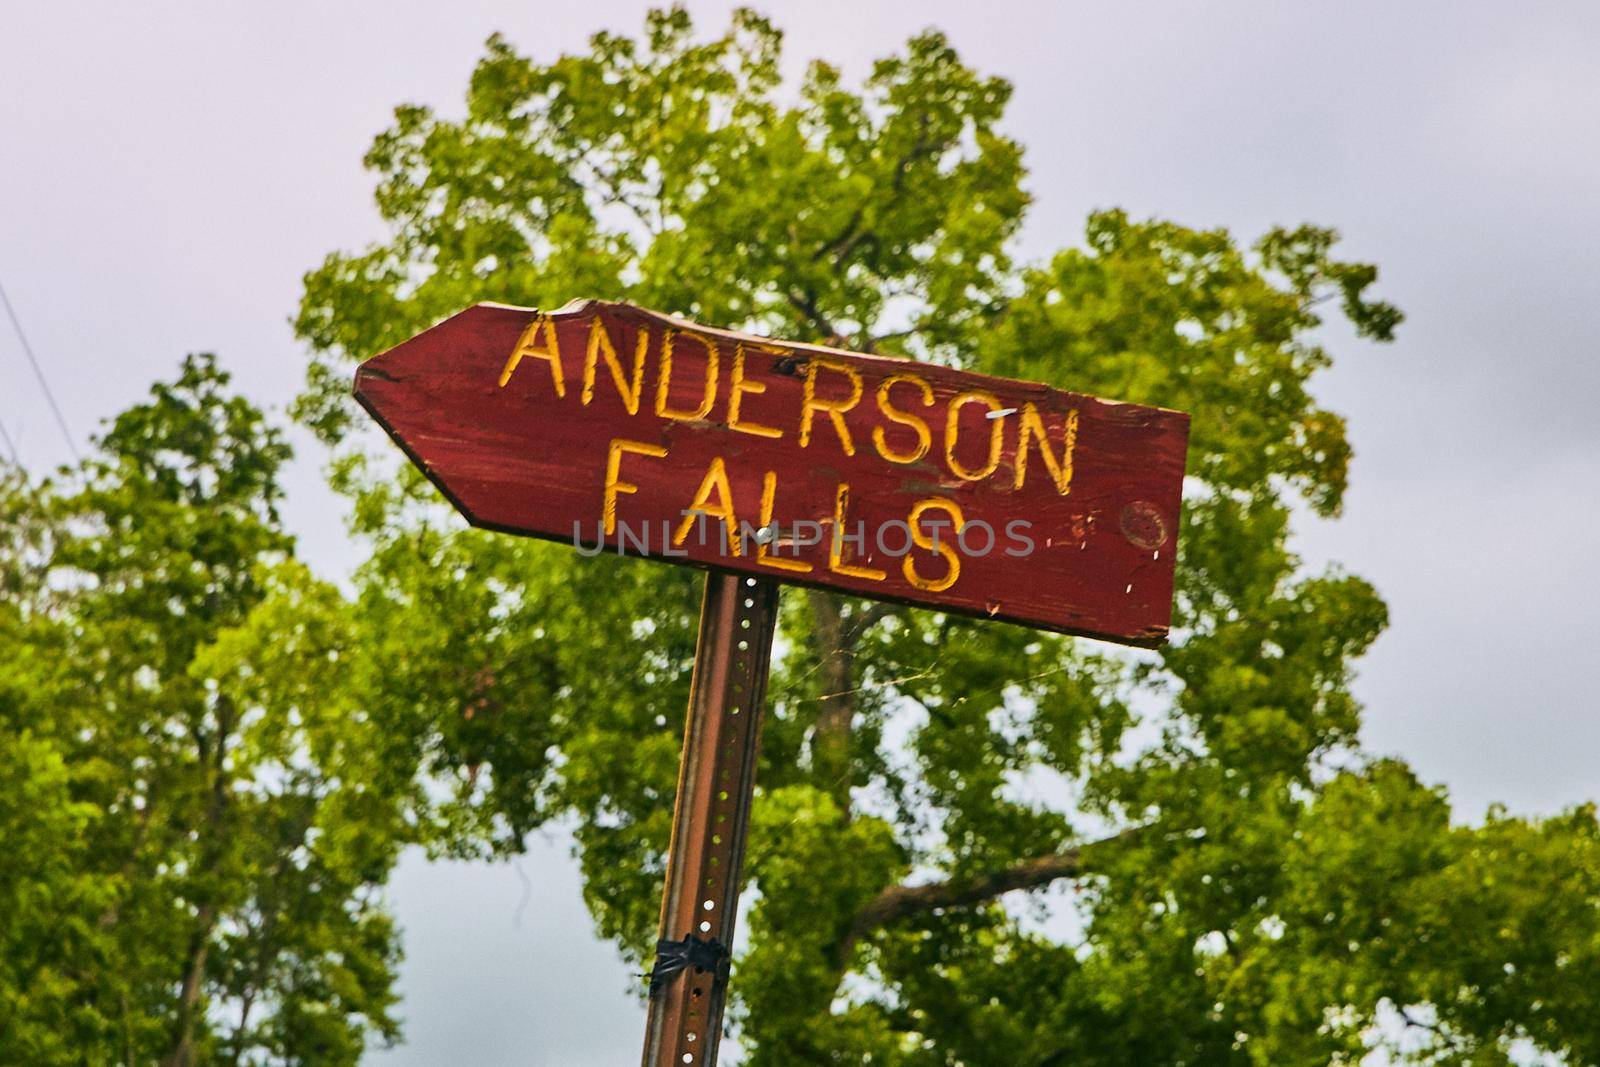 Image of Road sign for Anderson Falls with green trees in background